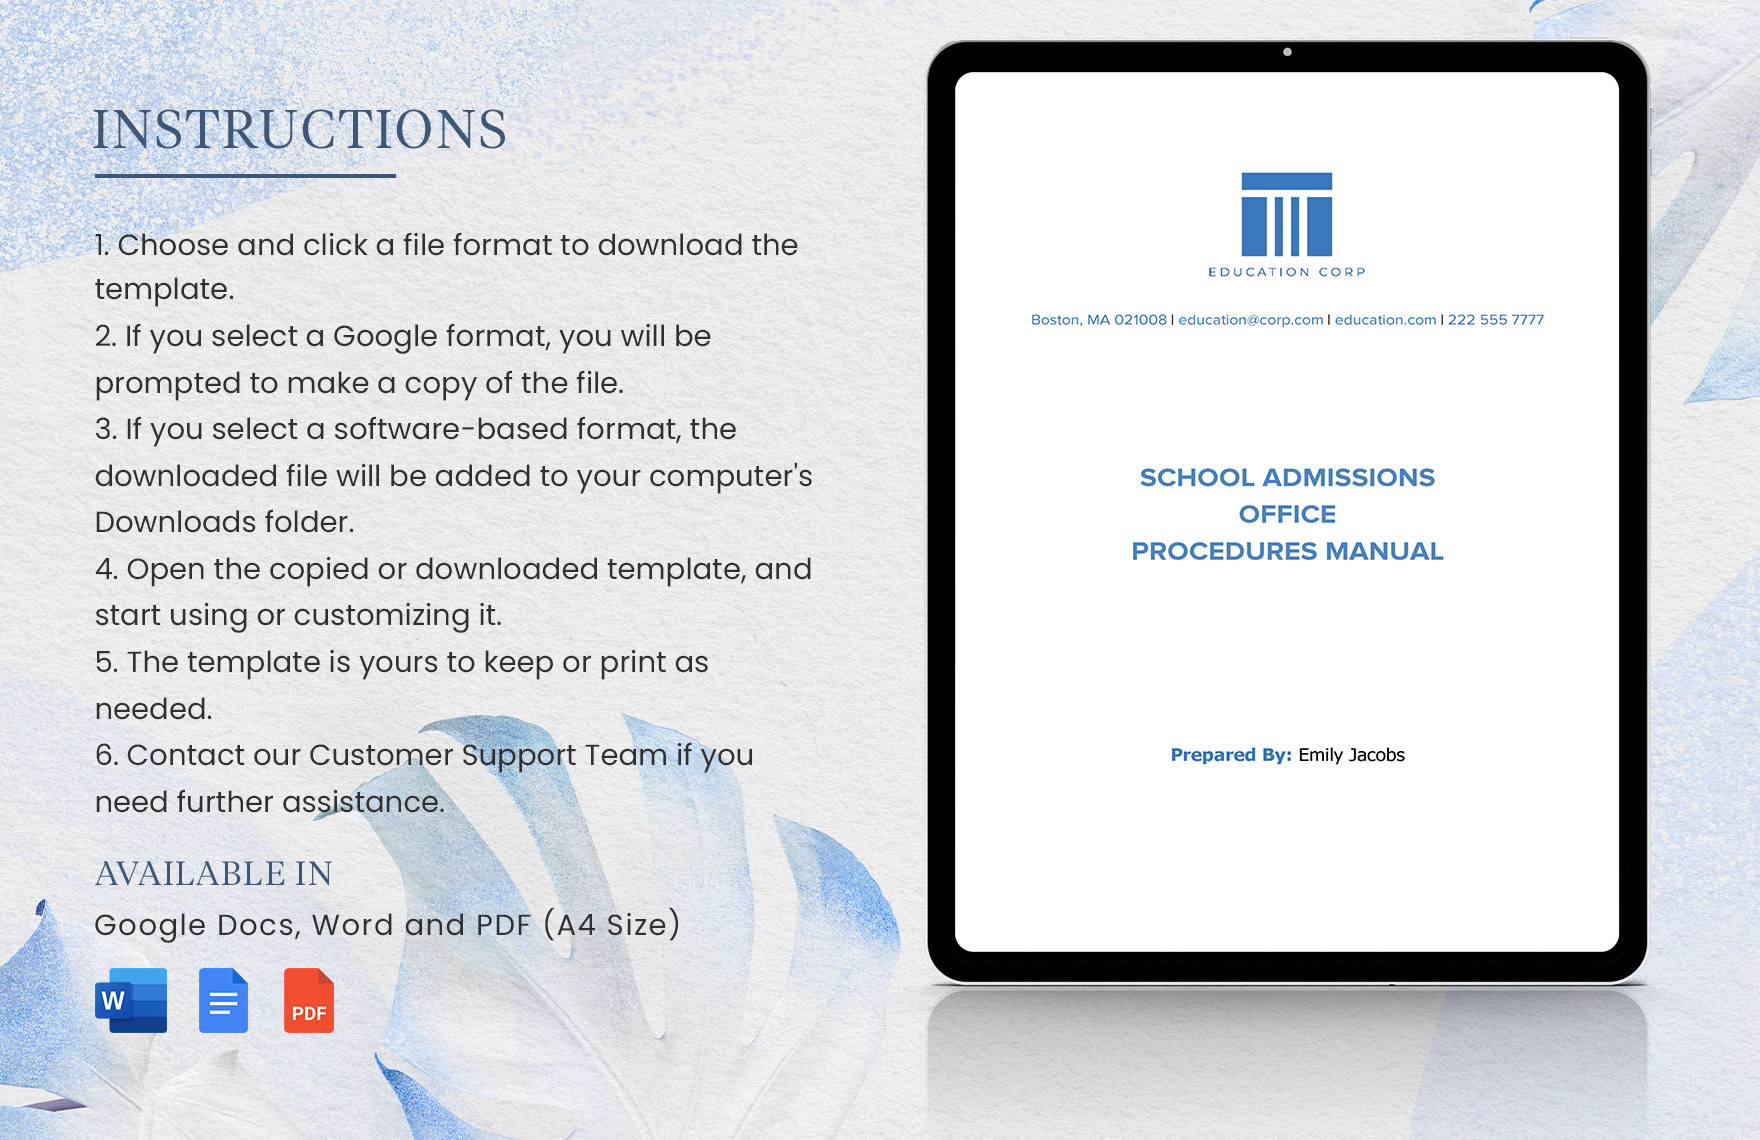 School Admissions Office Procedures Manual Template